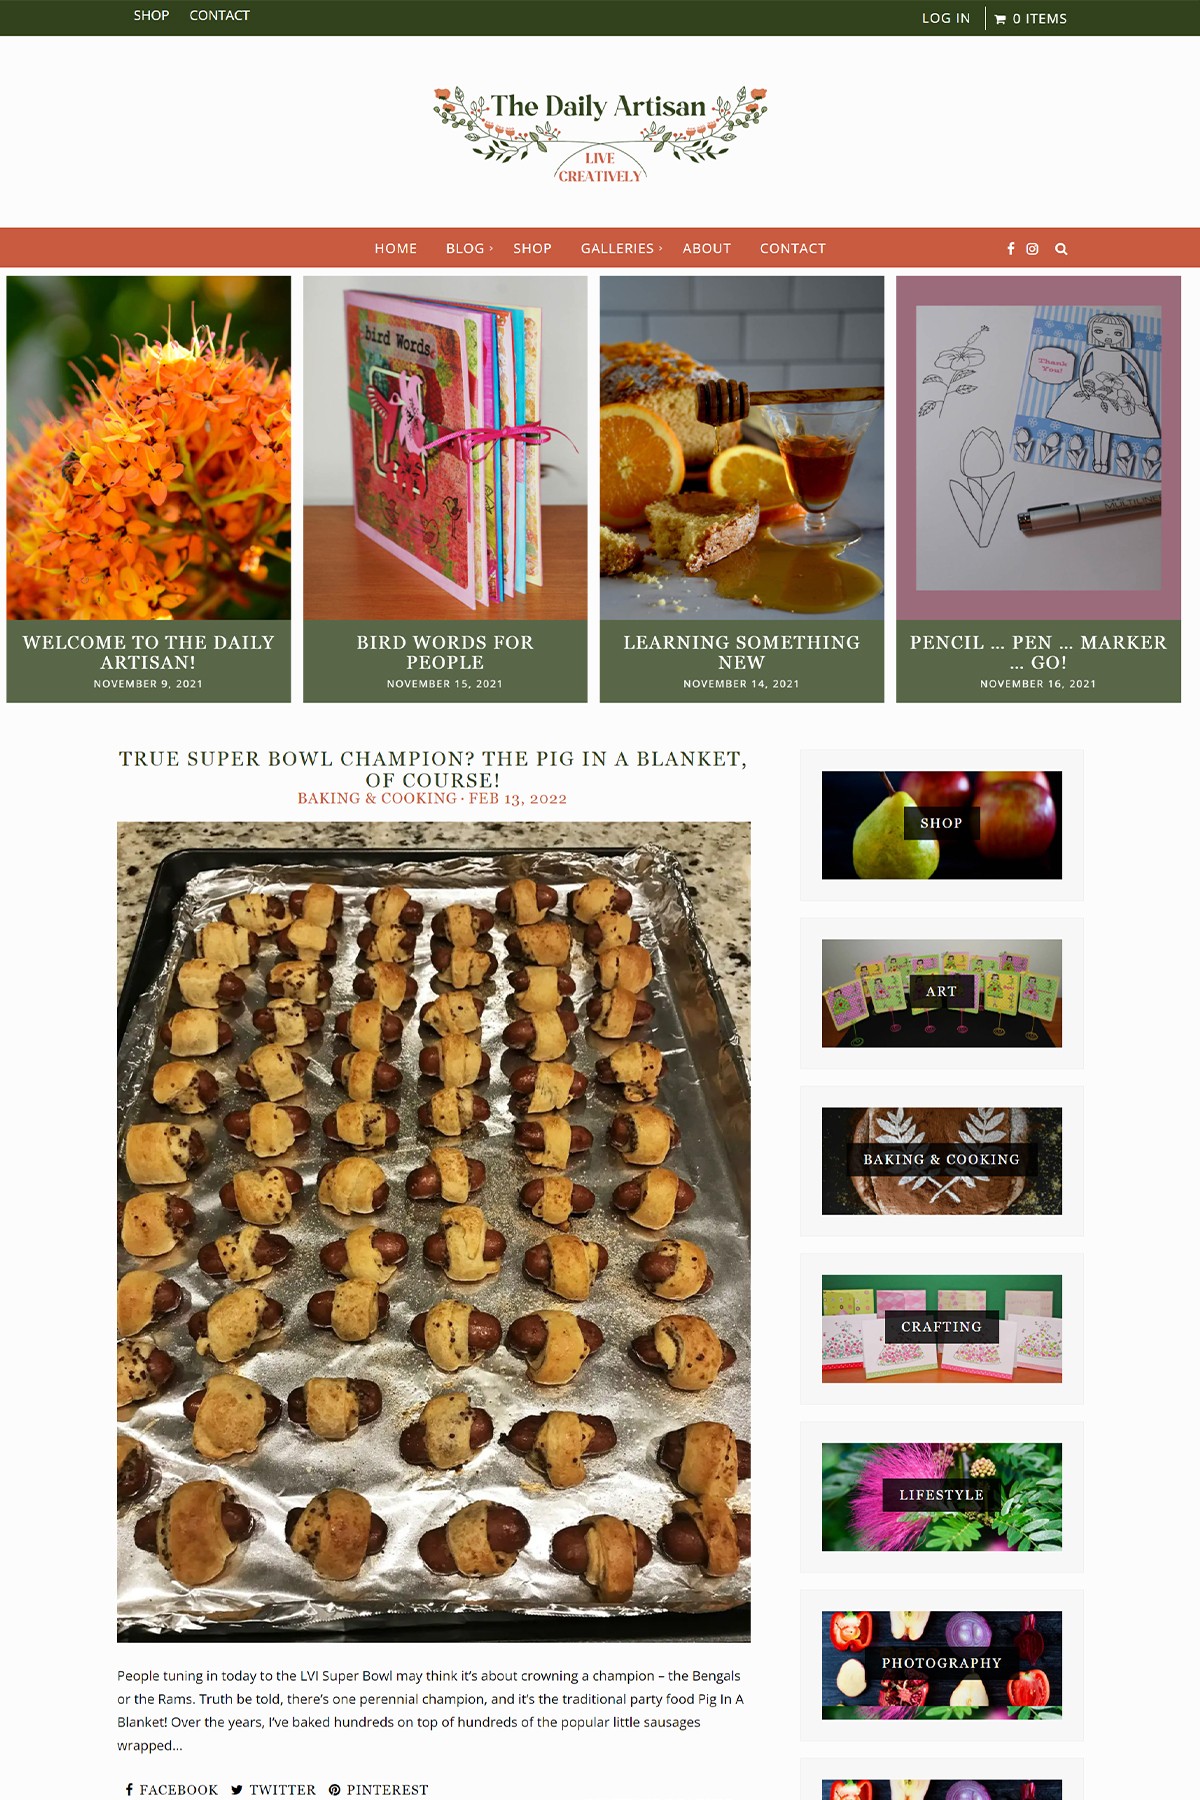 homepage of the Daily Artisan website